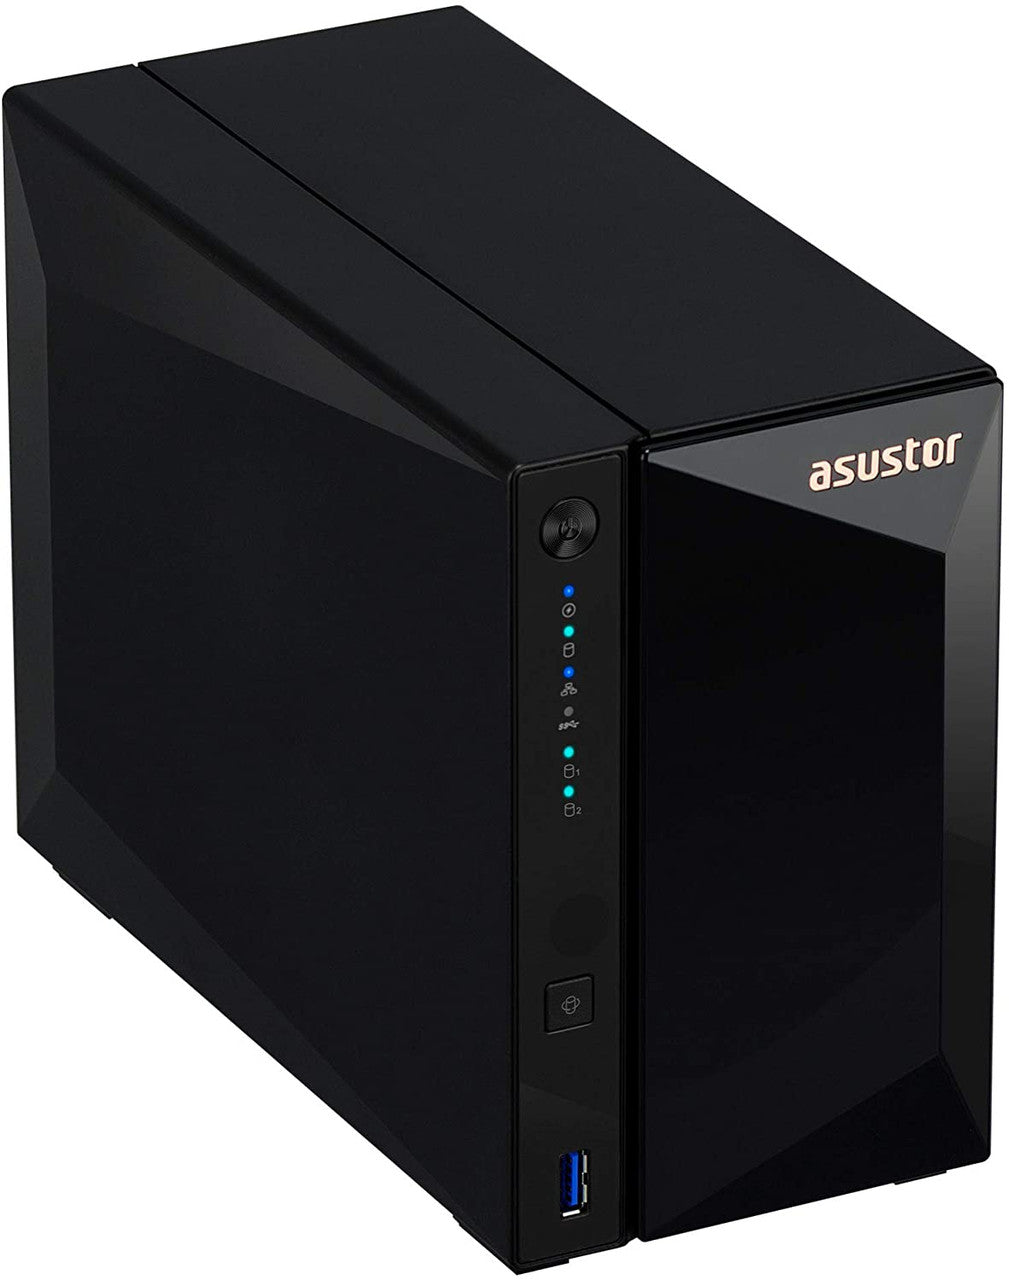 Asustor AS3302T 2-Bay Drivestor 2 PRO NAS with 2GB RAM and 20TB (2x10TB) Western Digital RED PRO Drives Fully Assembled and Tested